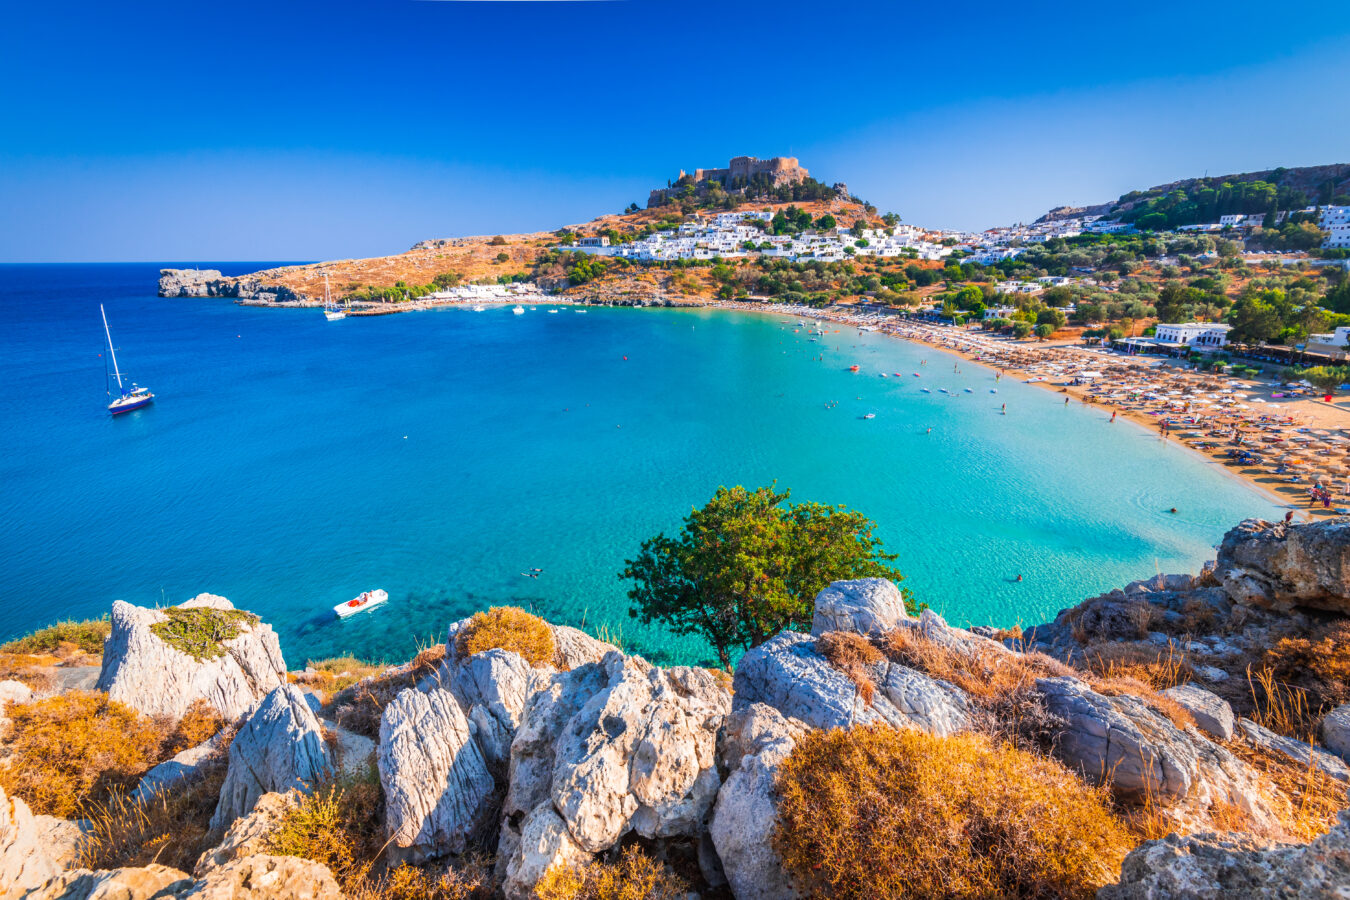 View of Lindos beach and hilltop Acropolis, one of the most beautiful Rhodes villages